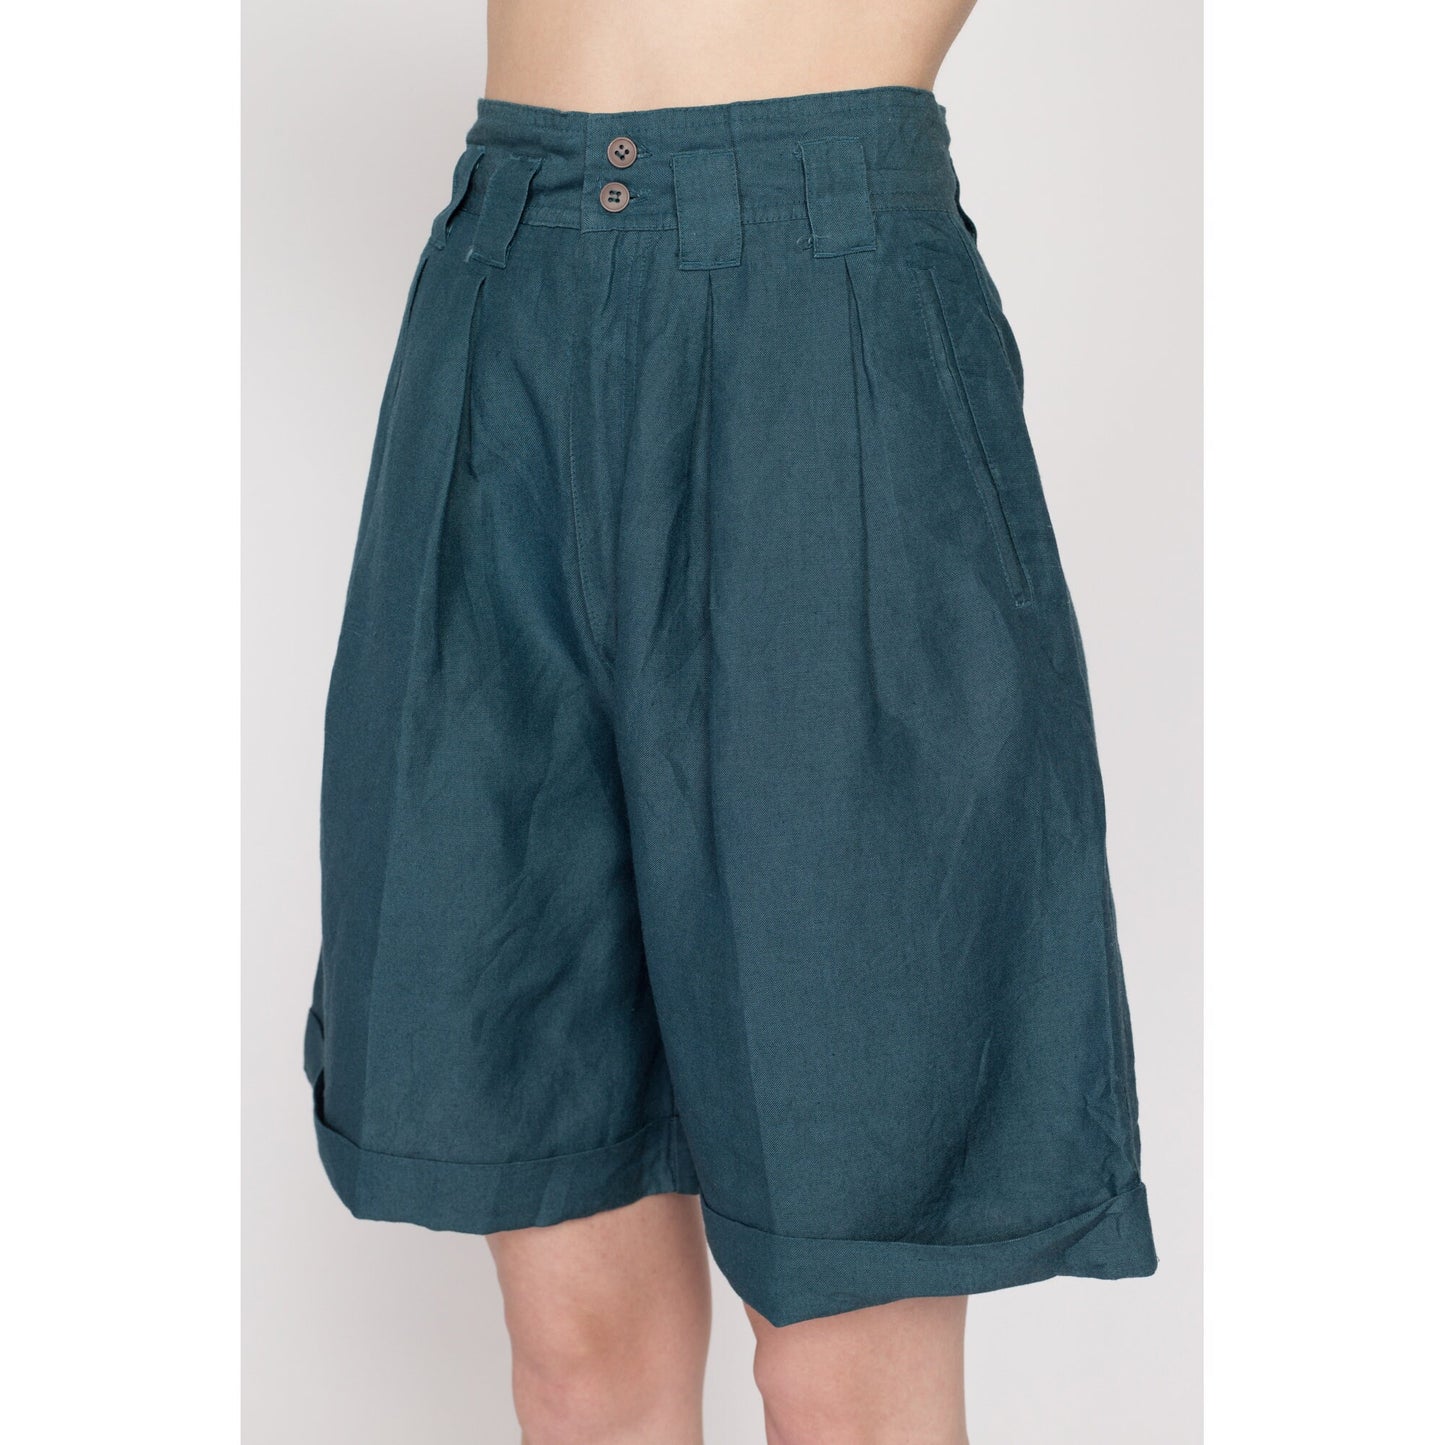 XS 80s Dark Teal Pleated Wide Leg Shorts 25" | Vintage High Waisted Cuffed Culotte Shorts